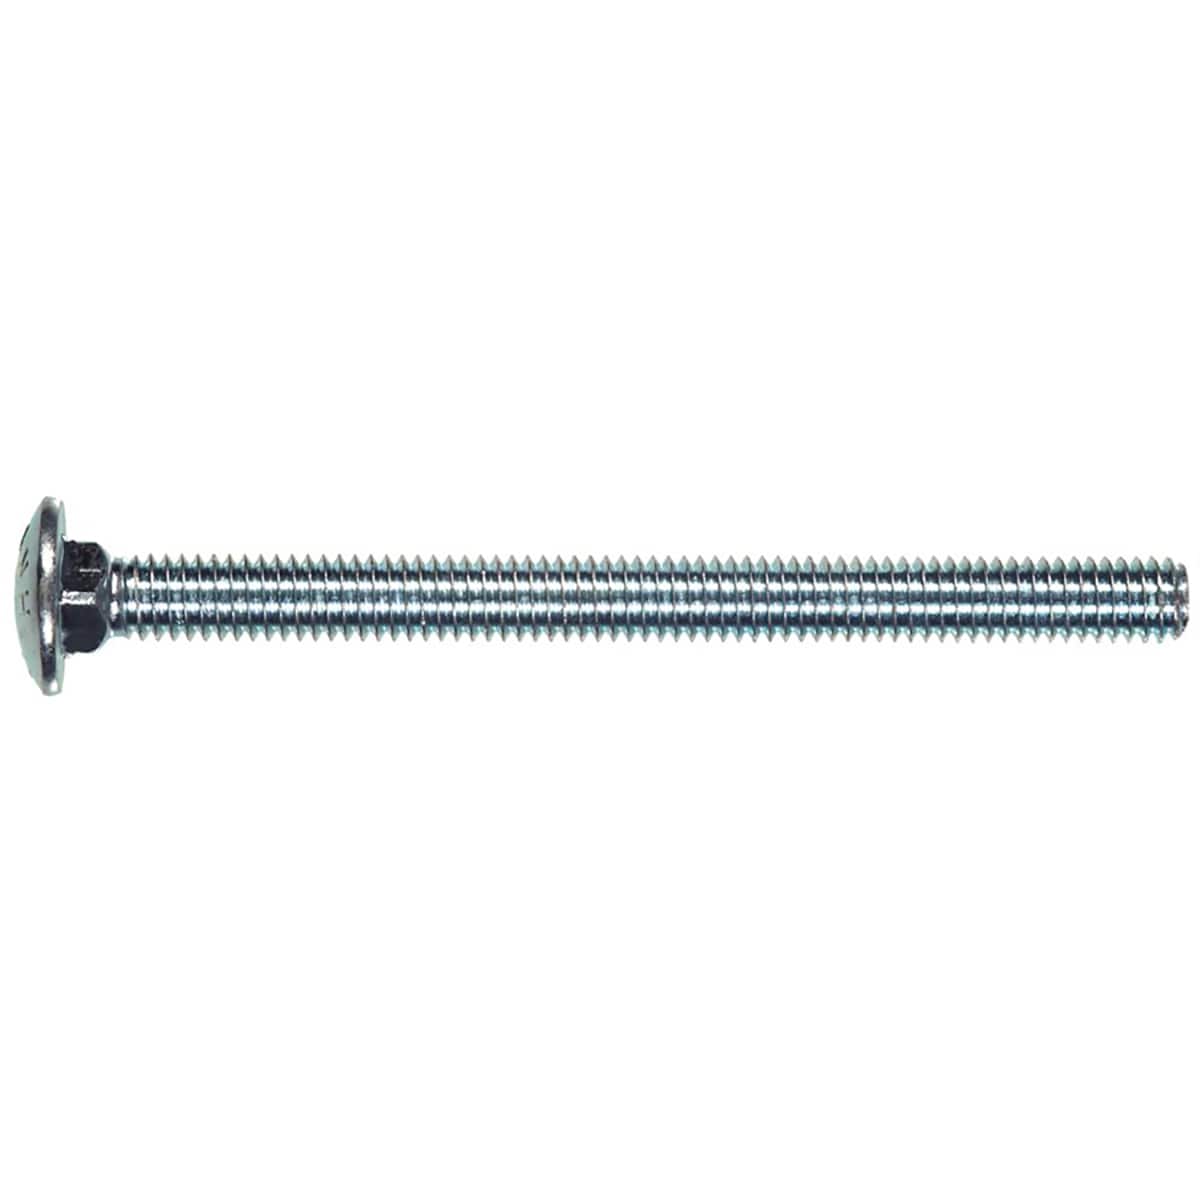 The Hillman Group 5840 Wood Screw 12 X 2 1/2-Inch 